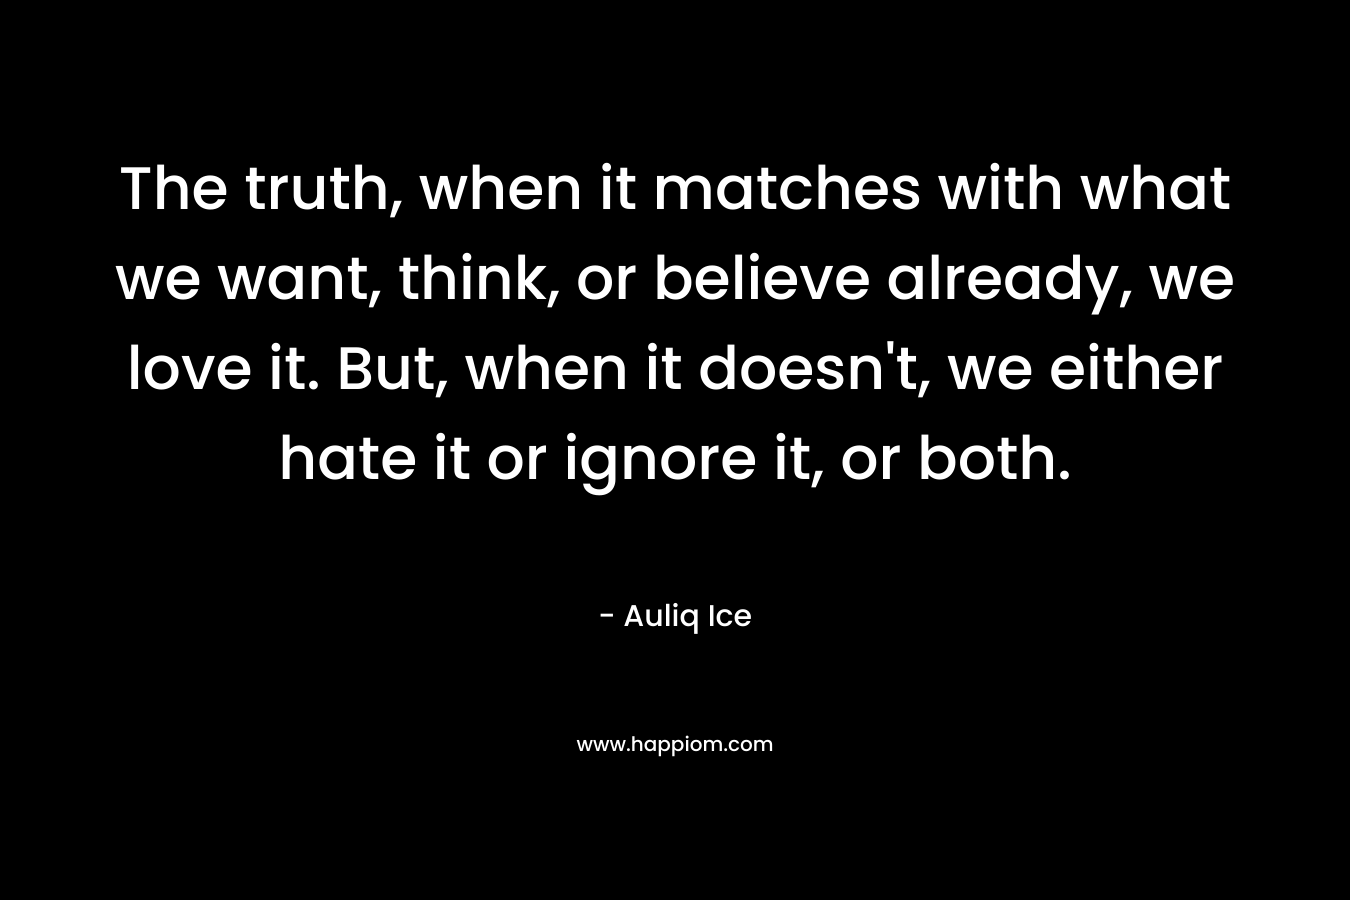 The truth, when it matches with what we want, think, or believe already, we love it. But, when it doesn’t, we either hate it or ignore it, or both. – Auliq Ice